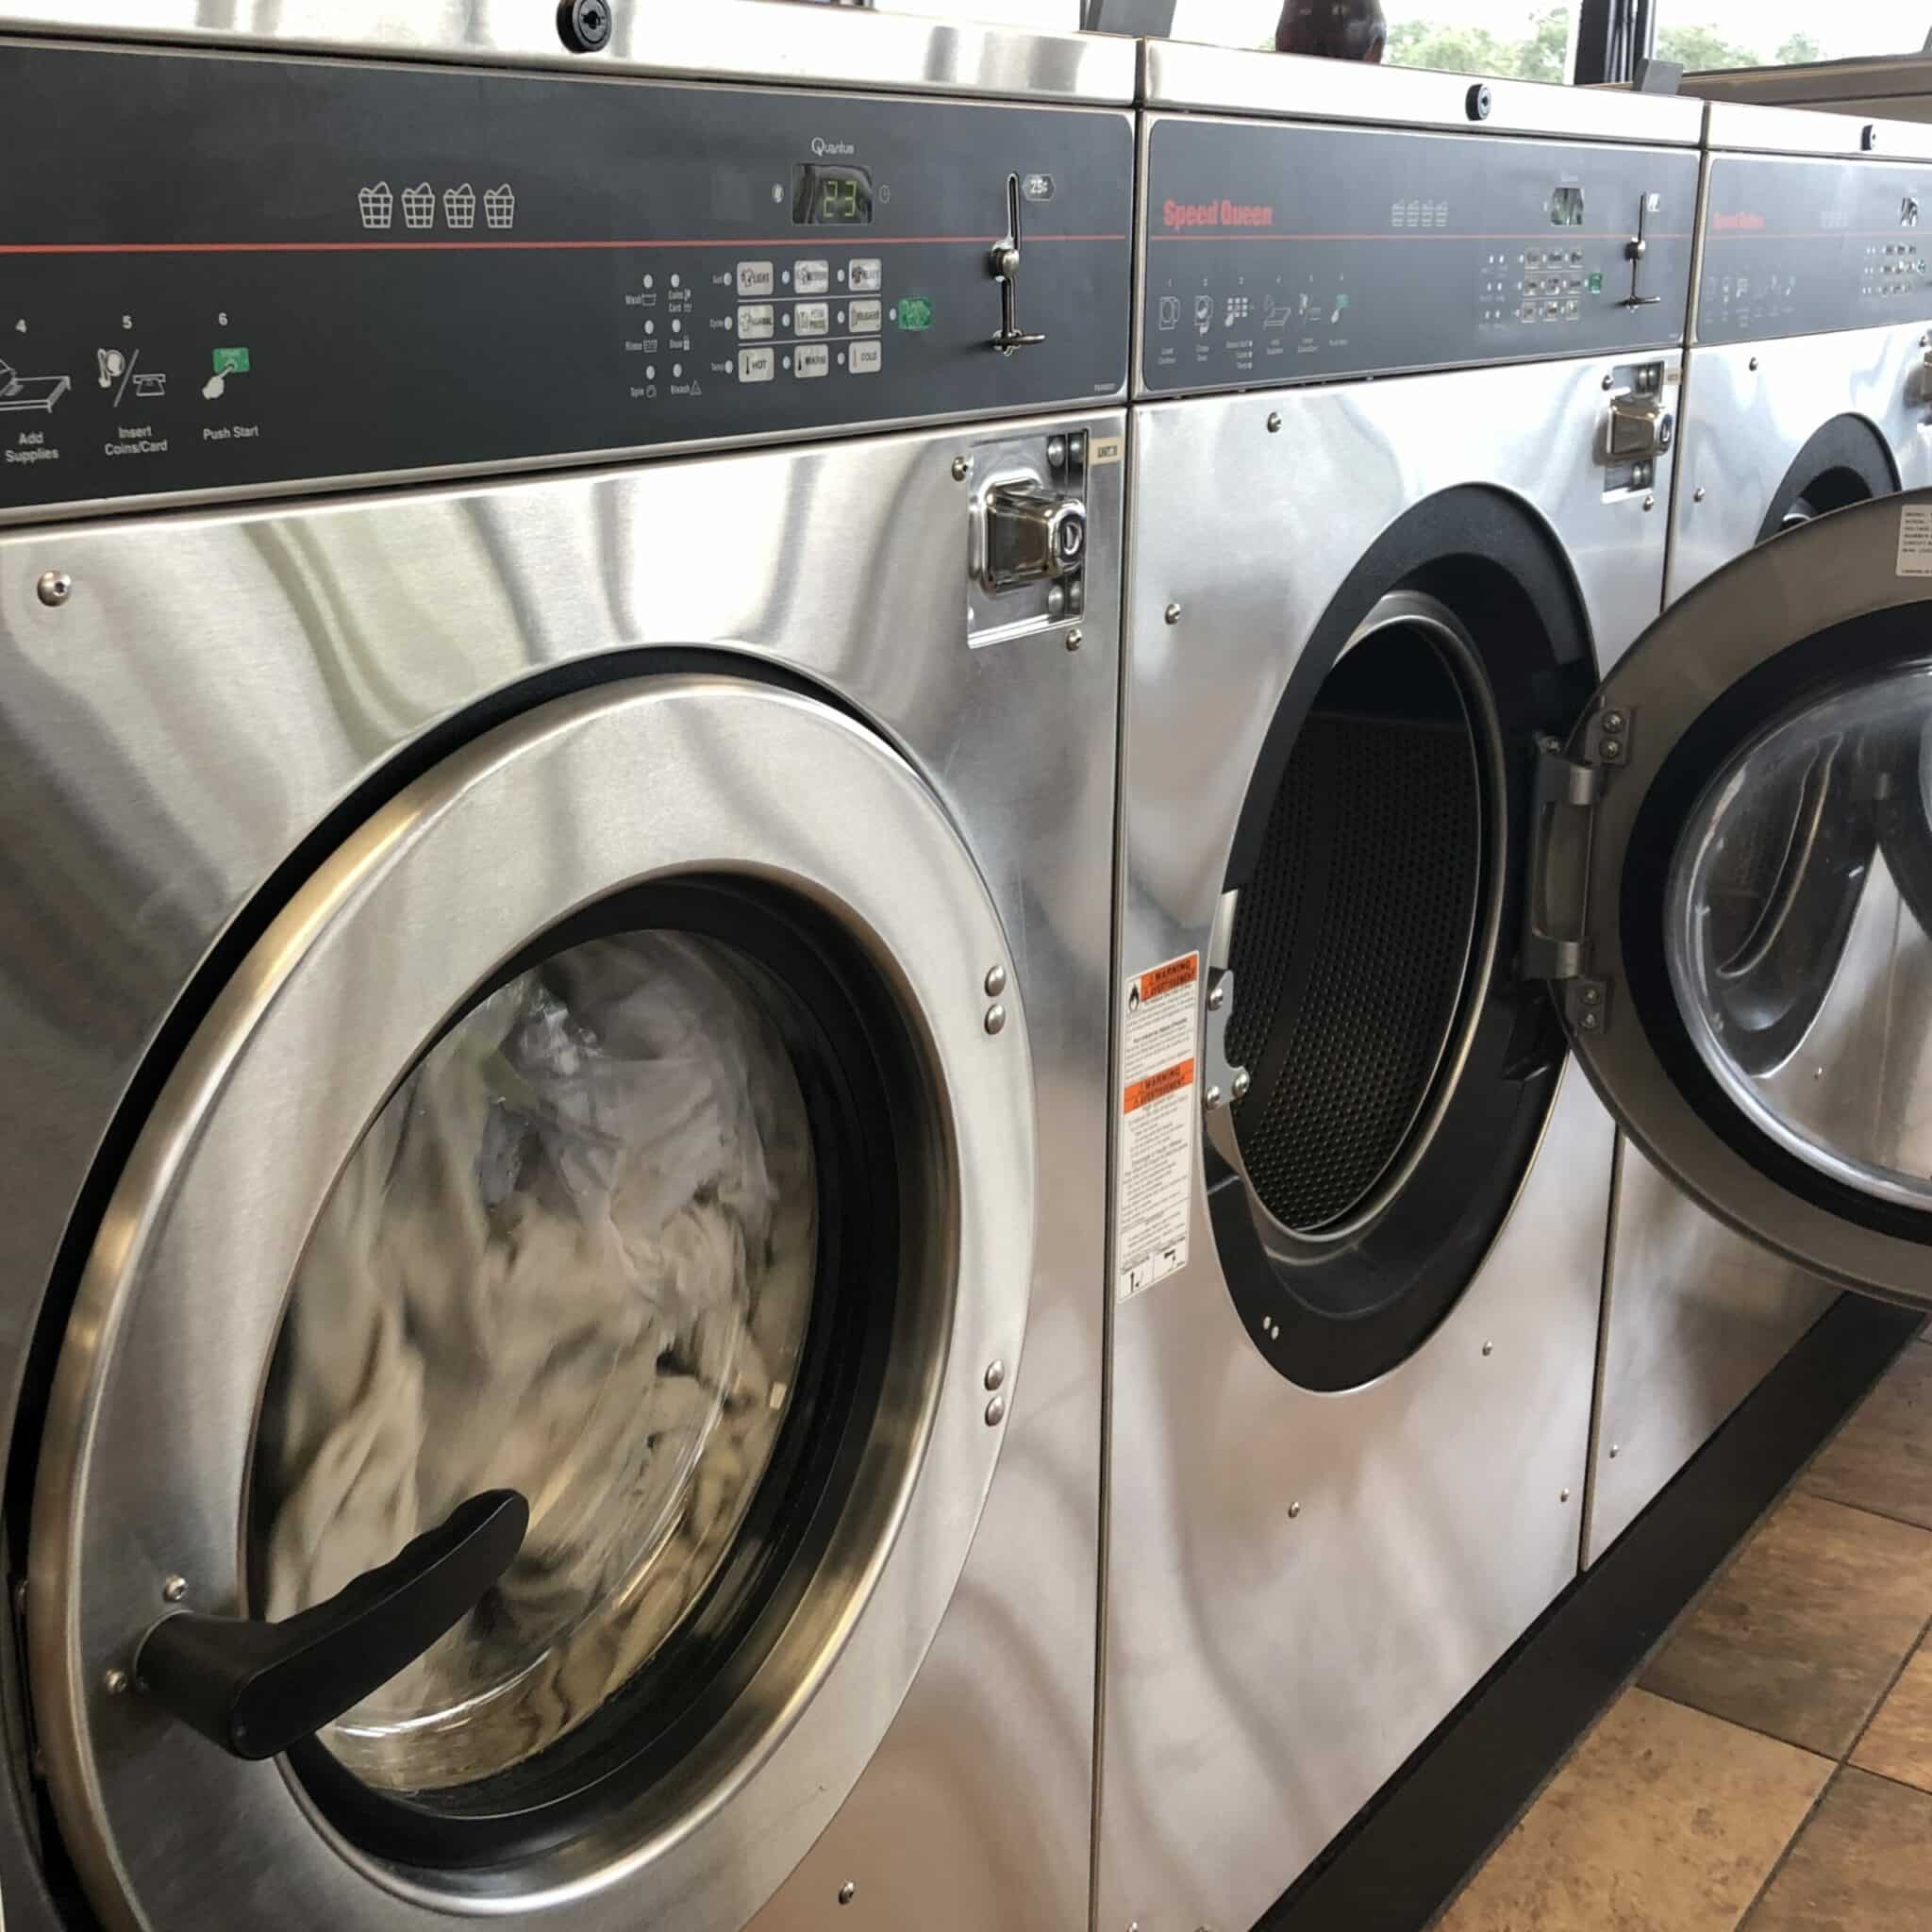 A Day at the Laundromat